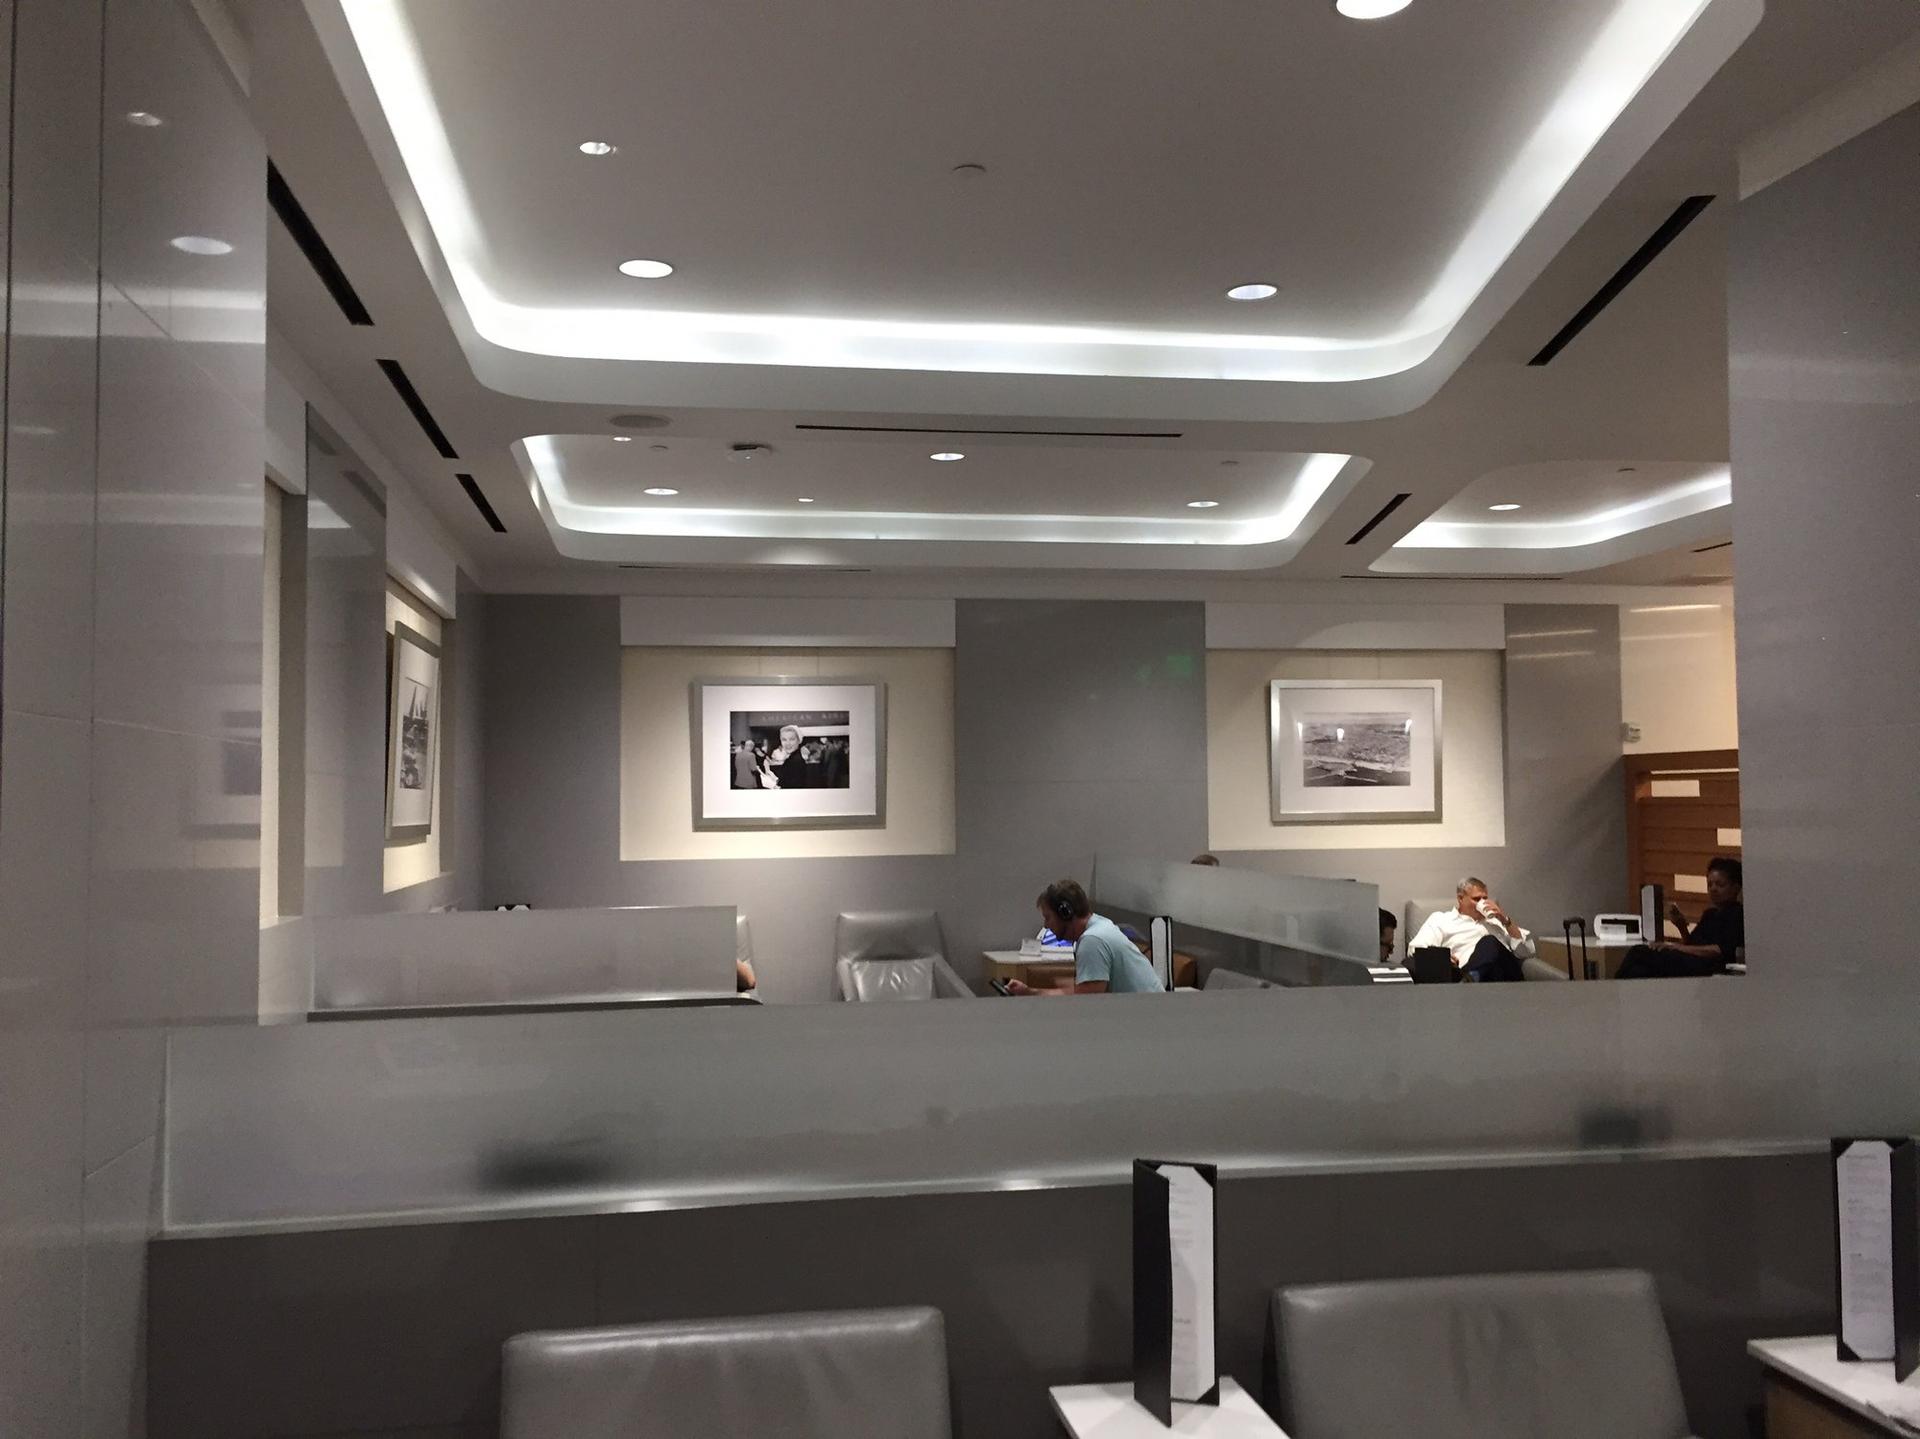 American Airlines Admirals Club image 27 of 43